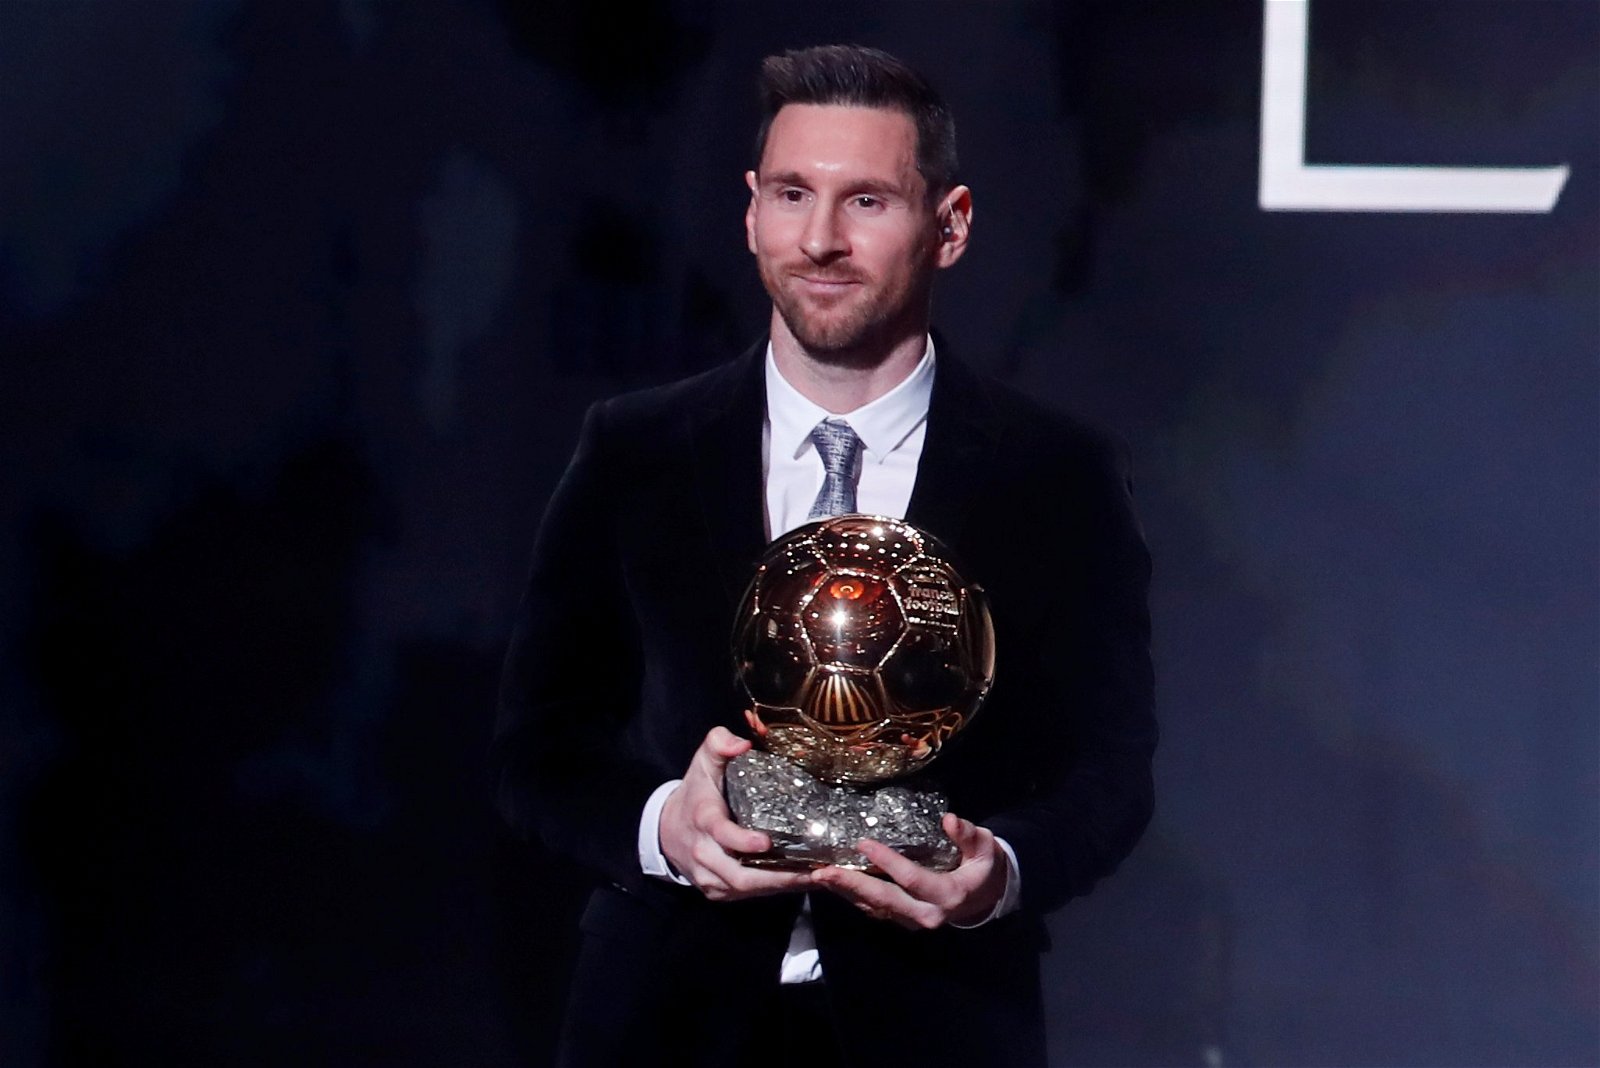 Lionel Messi clinches eighth Ballon d'Or, praises Barcelona as football's finest